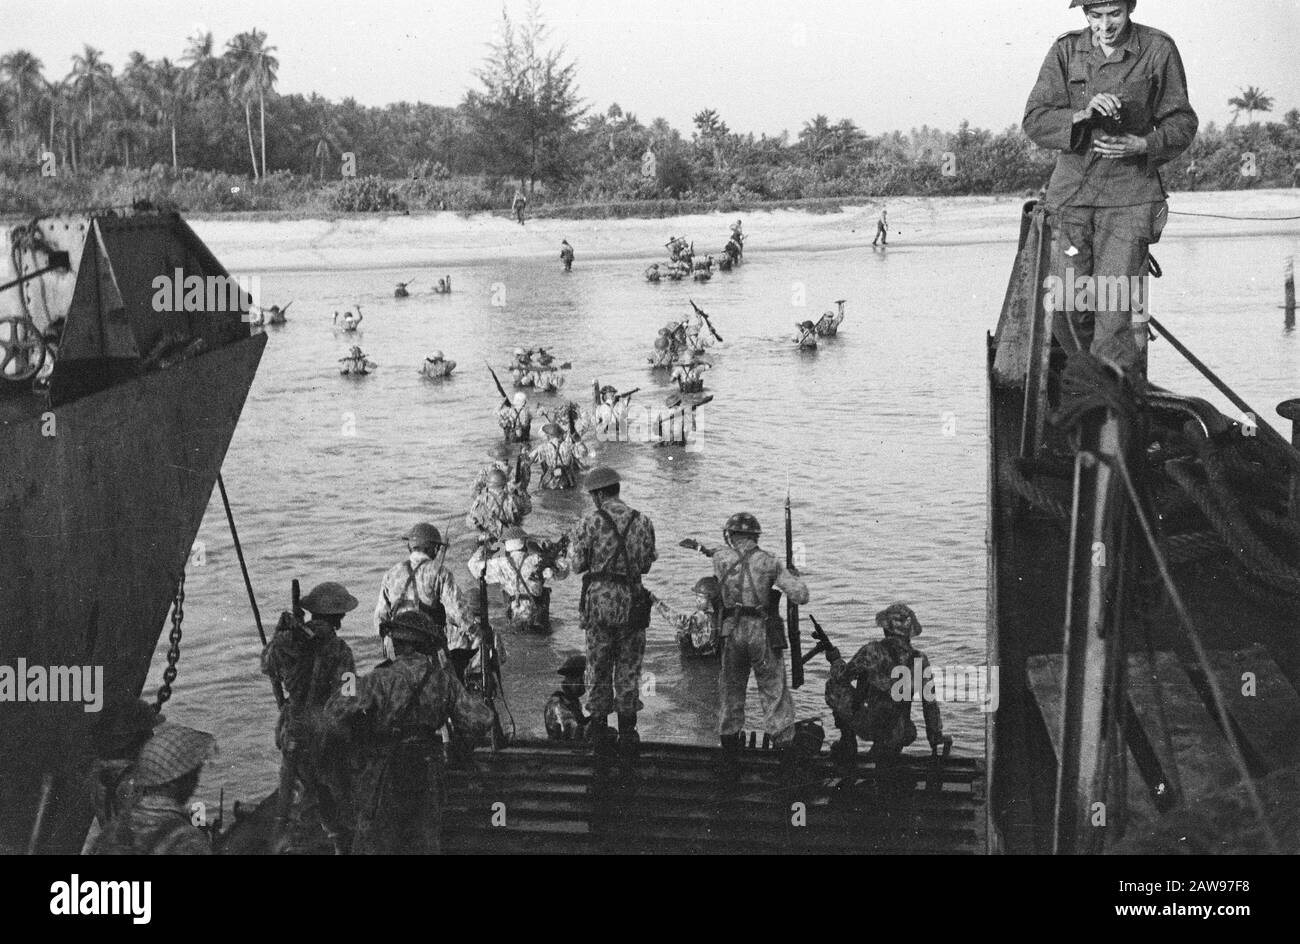 Loeboek Pakem and Baoengan  Perbaoengan (Sumatra East Coast). In collaboration with the Royal Navy and the Military Aviation Dutch troops made a landing at Baoengan which landing the occupation Pemetang Siantar preceded Date: July 29, 1948 Location: Indonesia, Dutch East Indies, Sumatra Stock Photo